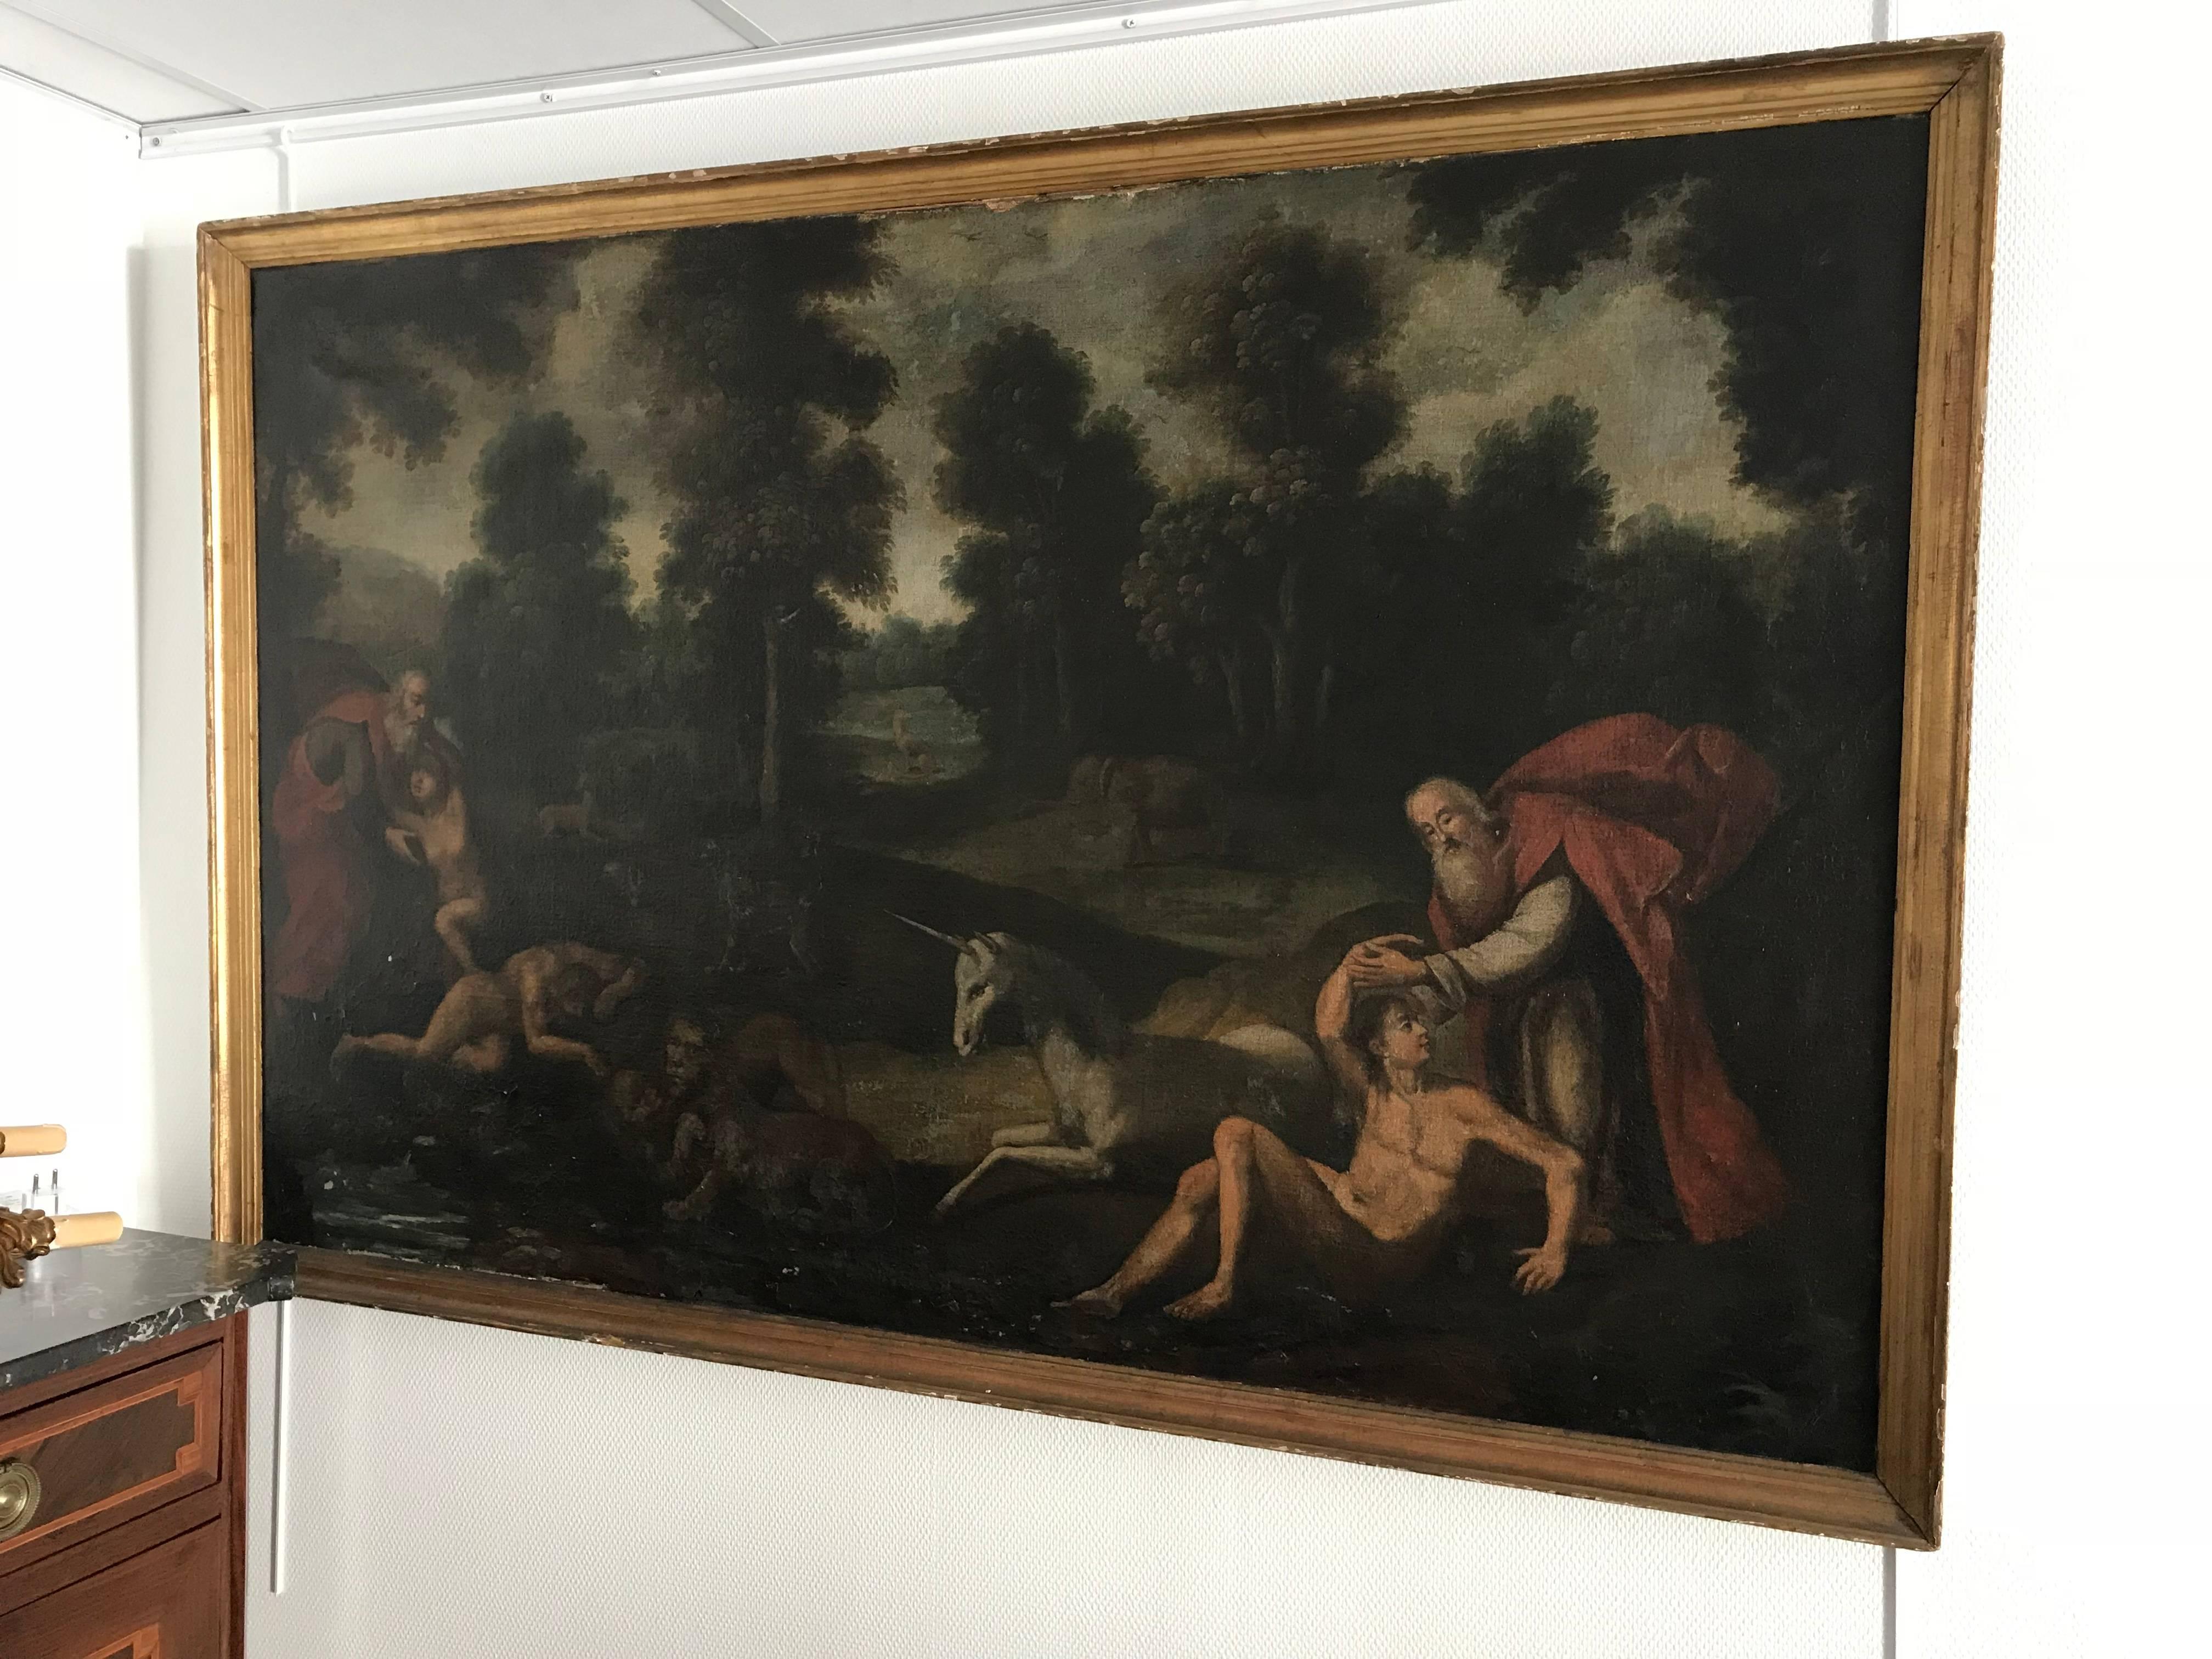 Very fine quality 17th century Flemish Old Master oil painting. The work depicts the very rare subject within art, of the Creation of Adam and Eve at the Garden of Eden. The work is painted on a grand scale, with the canvas measuring 102cm x 158cm.